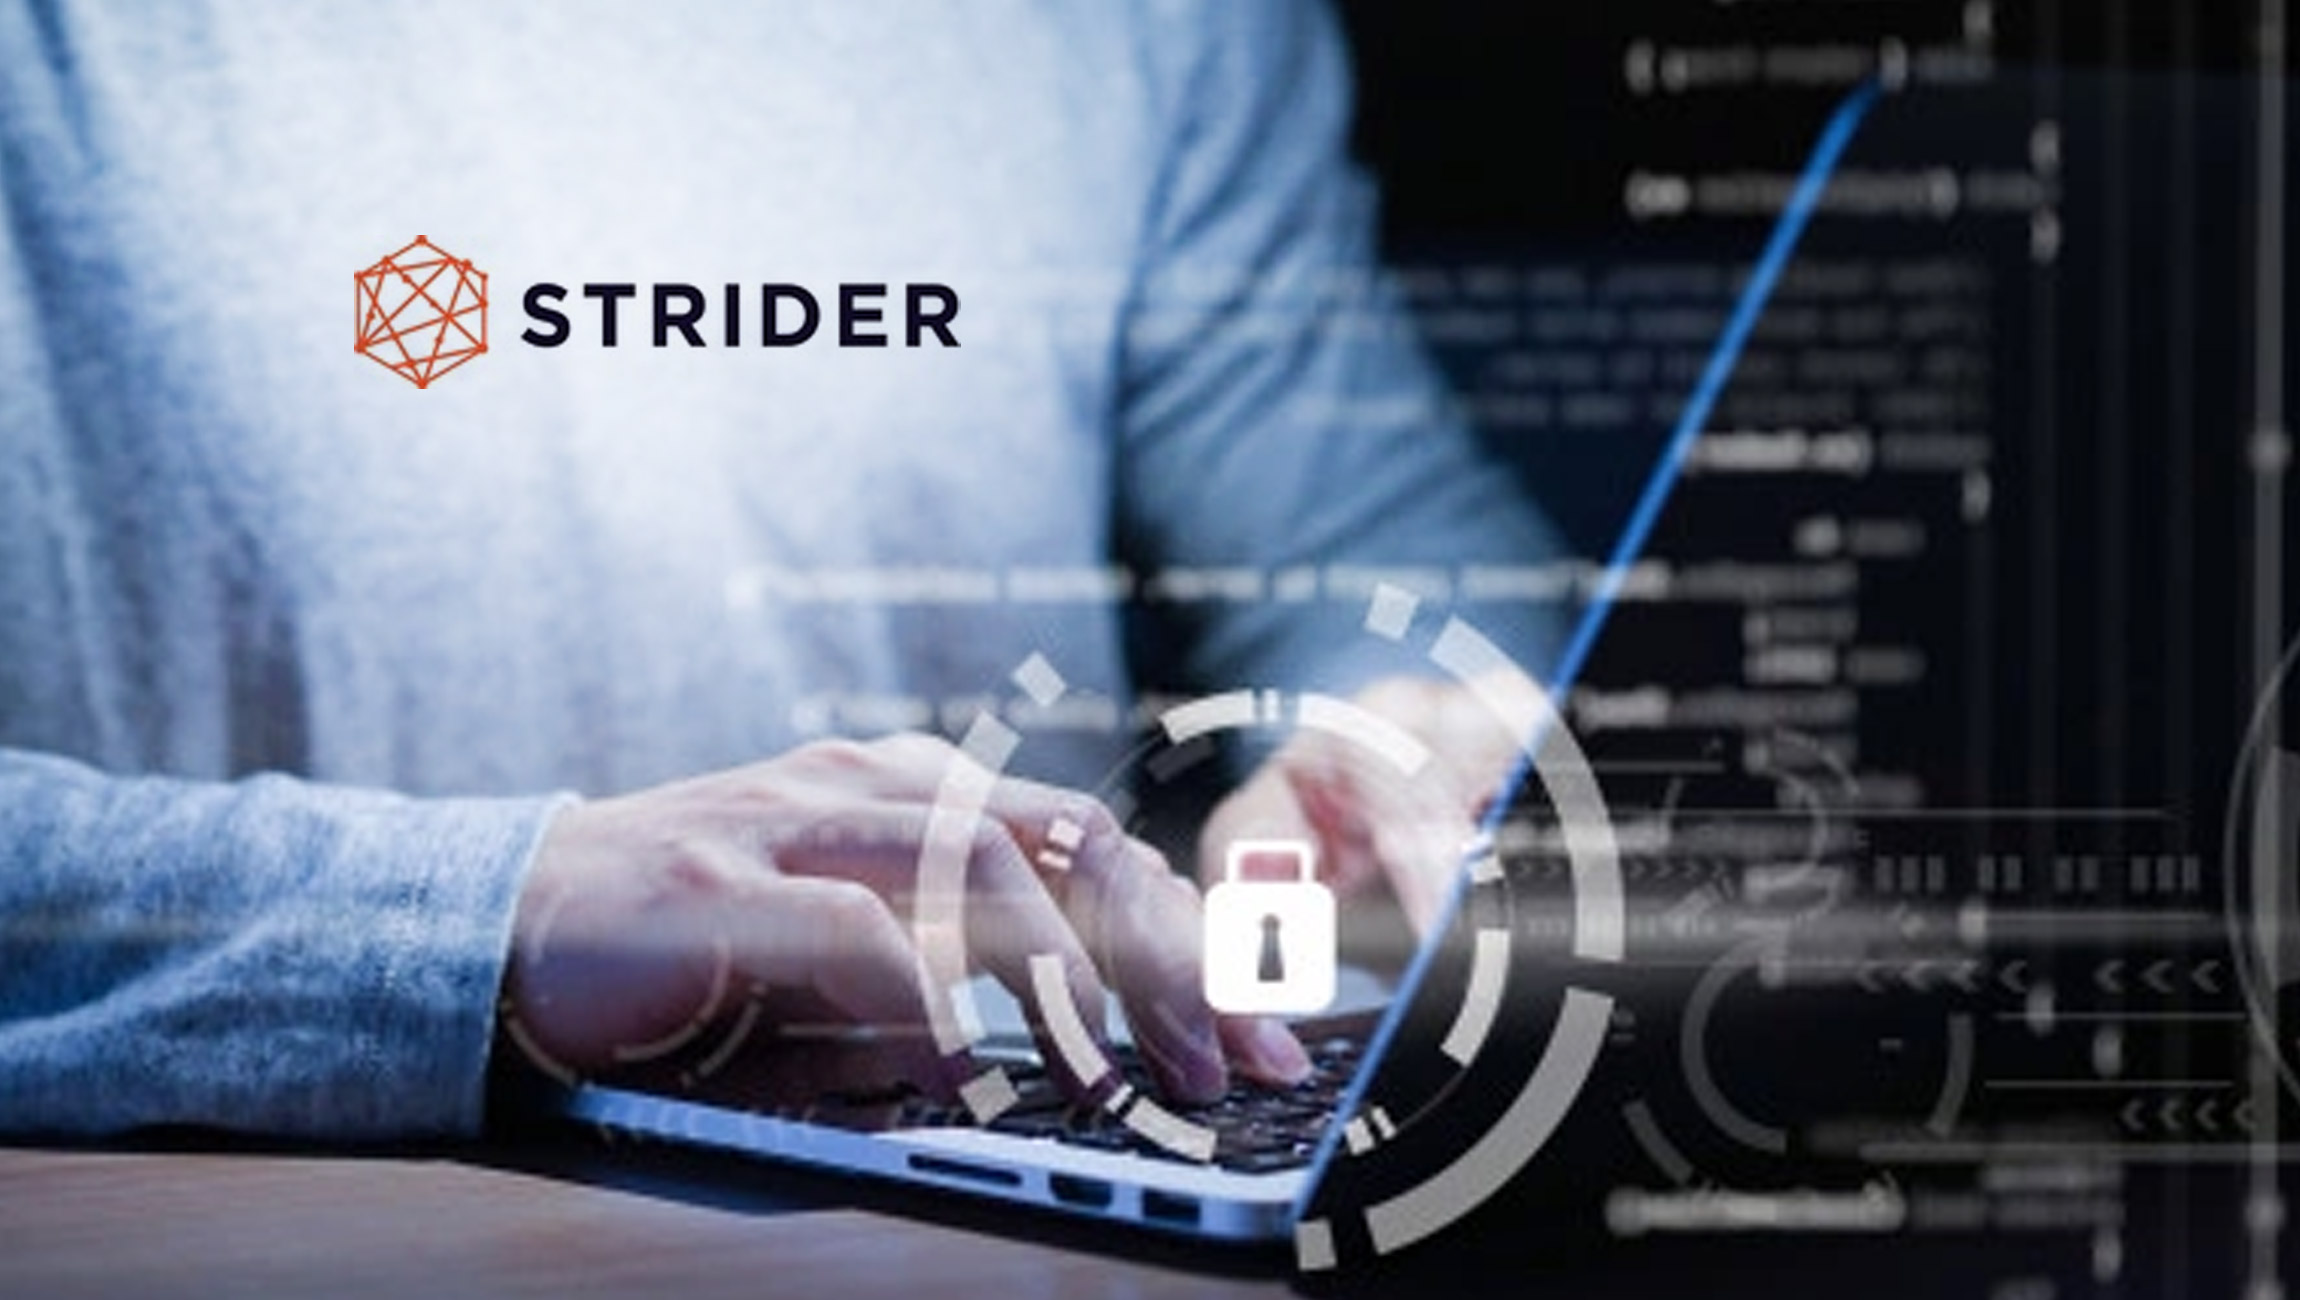 Strider Announces Launch of Strider Shield™ to Enable Organizations to Combat Nation-State Directed IP Theft and Supply Chain Threats